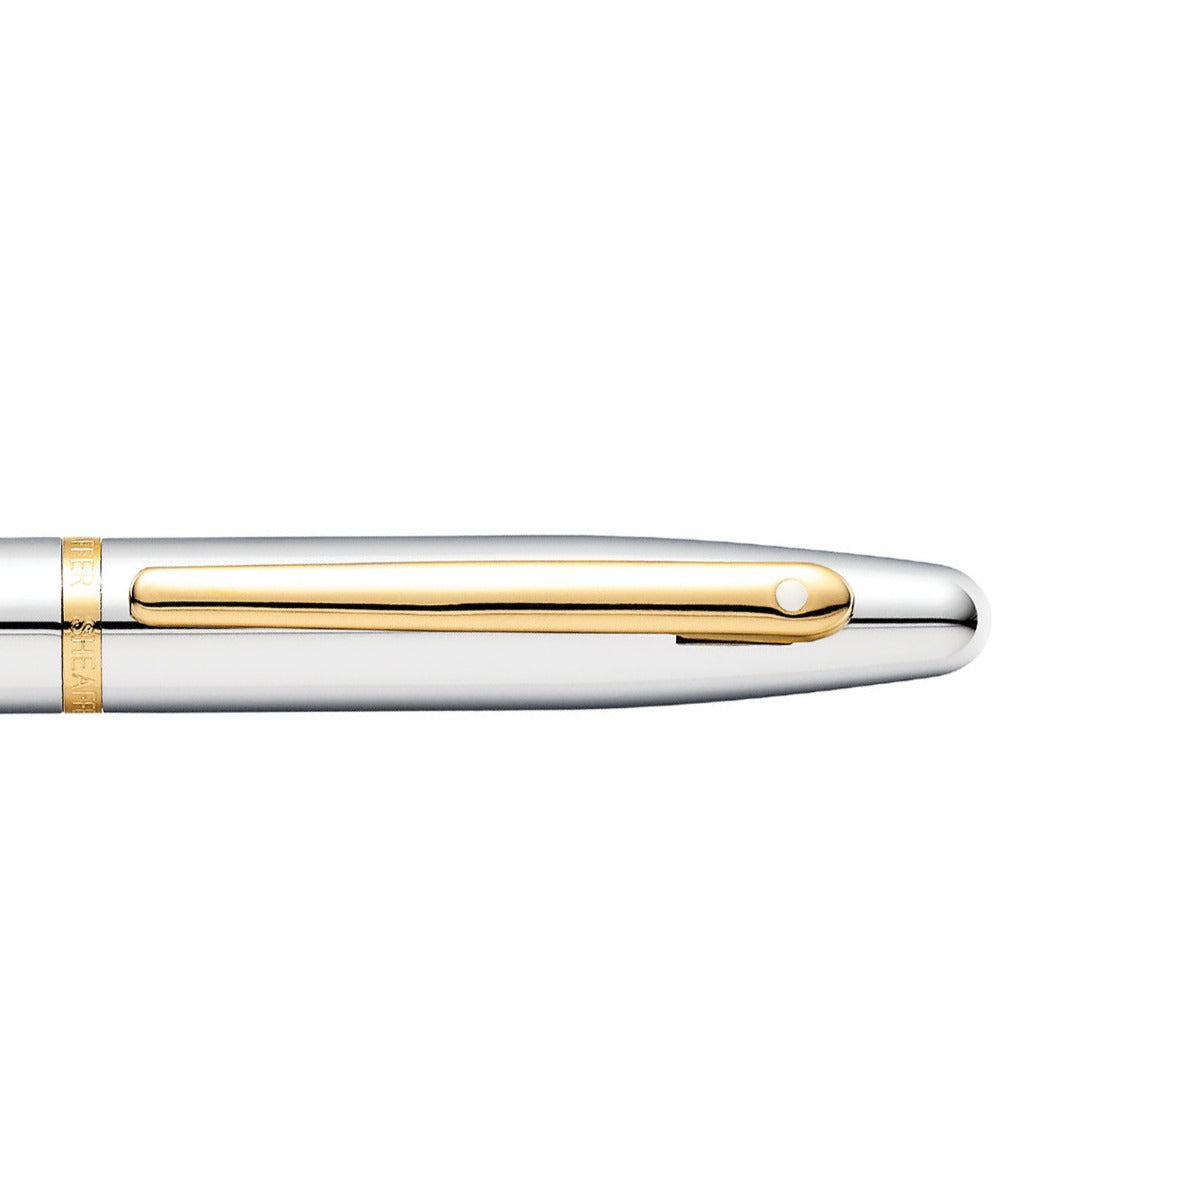 A Sheaffer VFM Polished Chrome Fountain Pen With Gold Trims - Fine with silver and gold finishes on a white background.